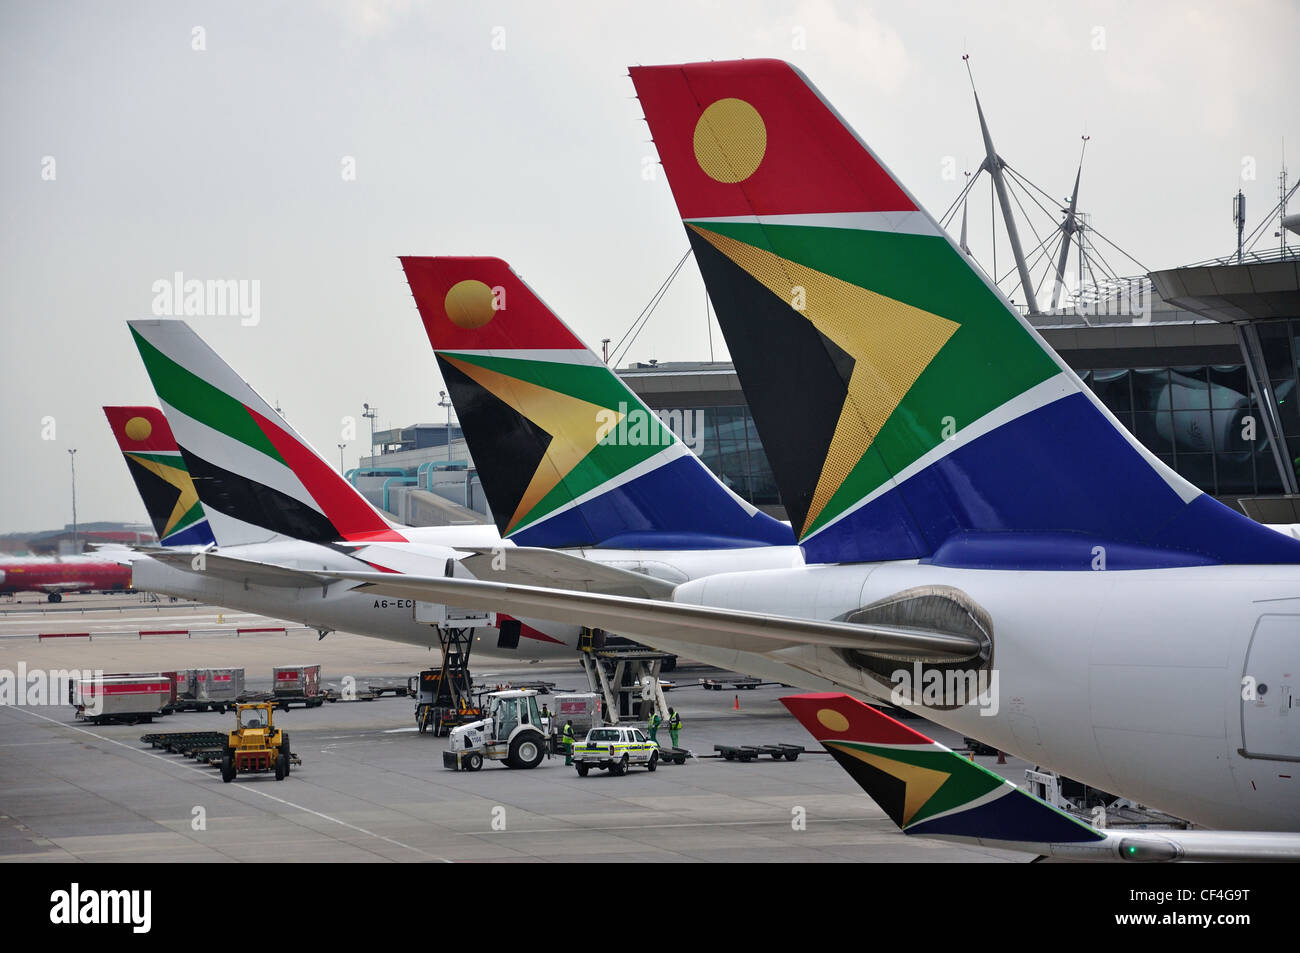 South African Airways logos on aircraft tails, O.R. Tambo International Airport, Johannesburg, Gauteng, Republic of South Africa Stock Photo